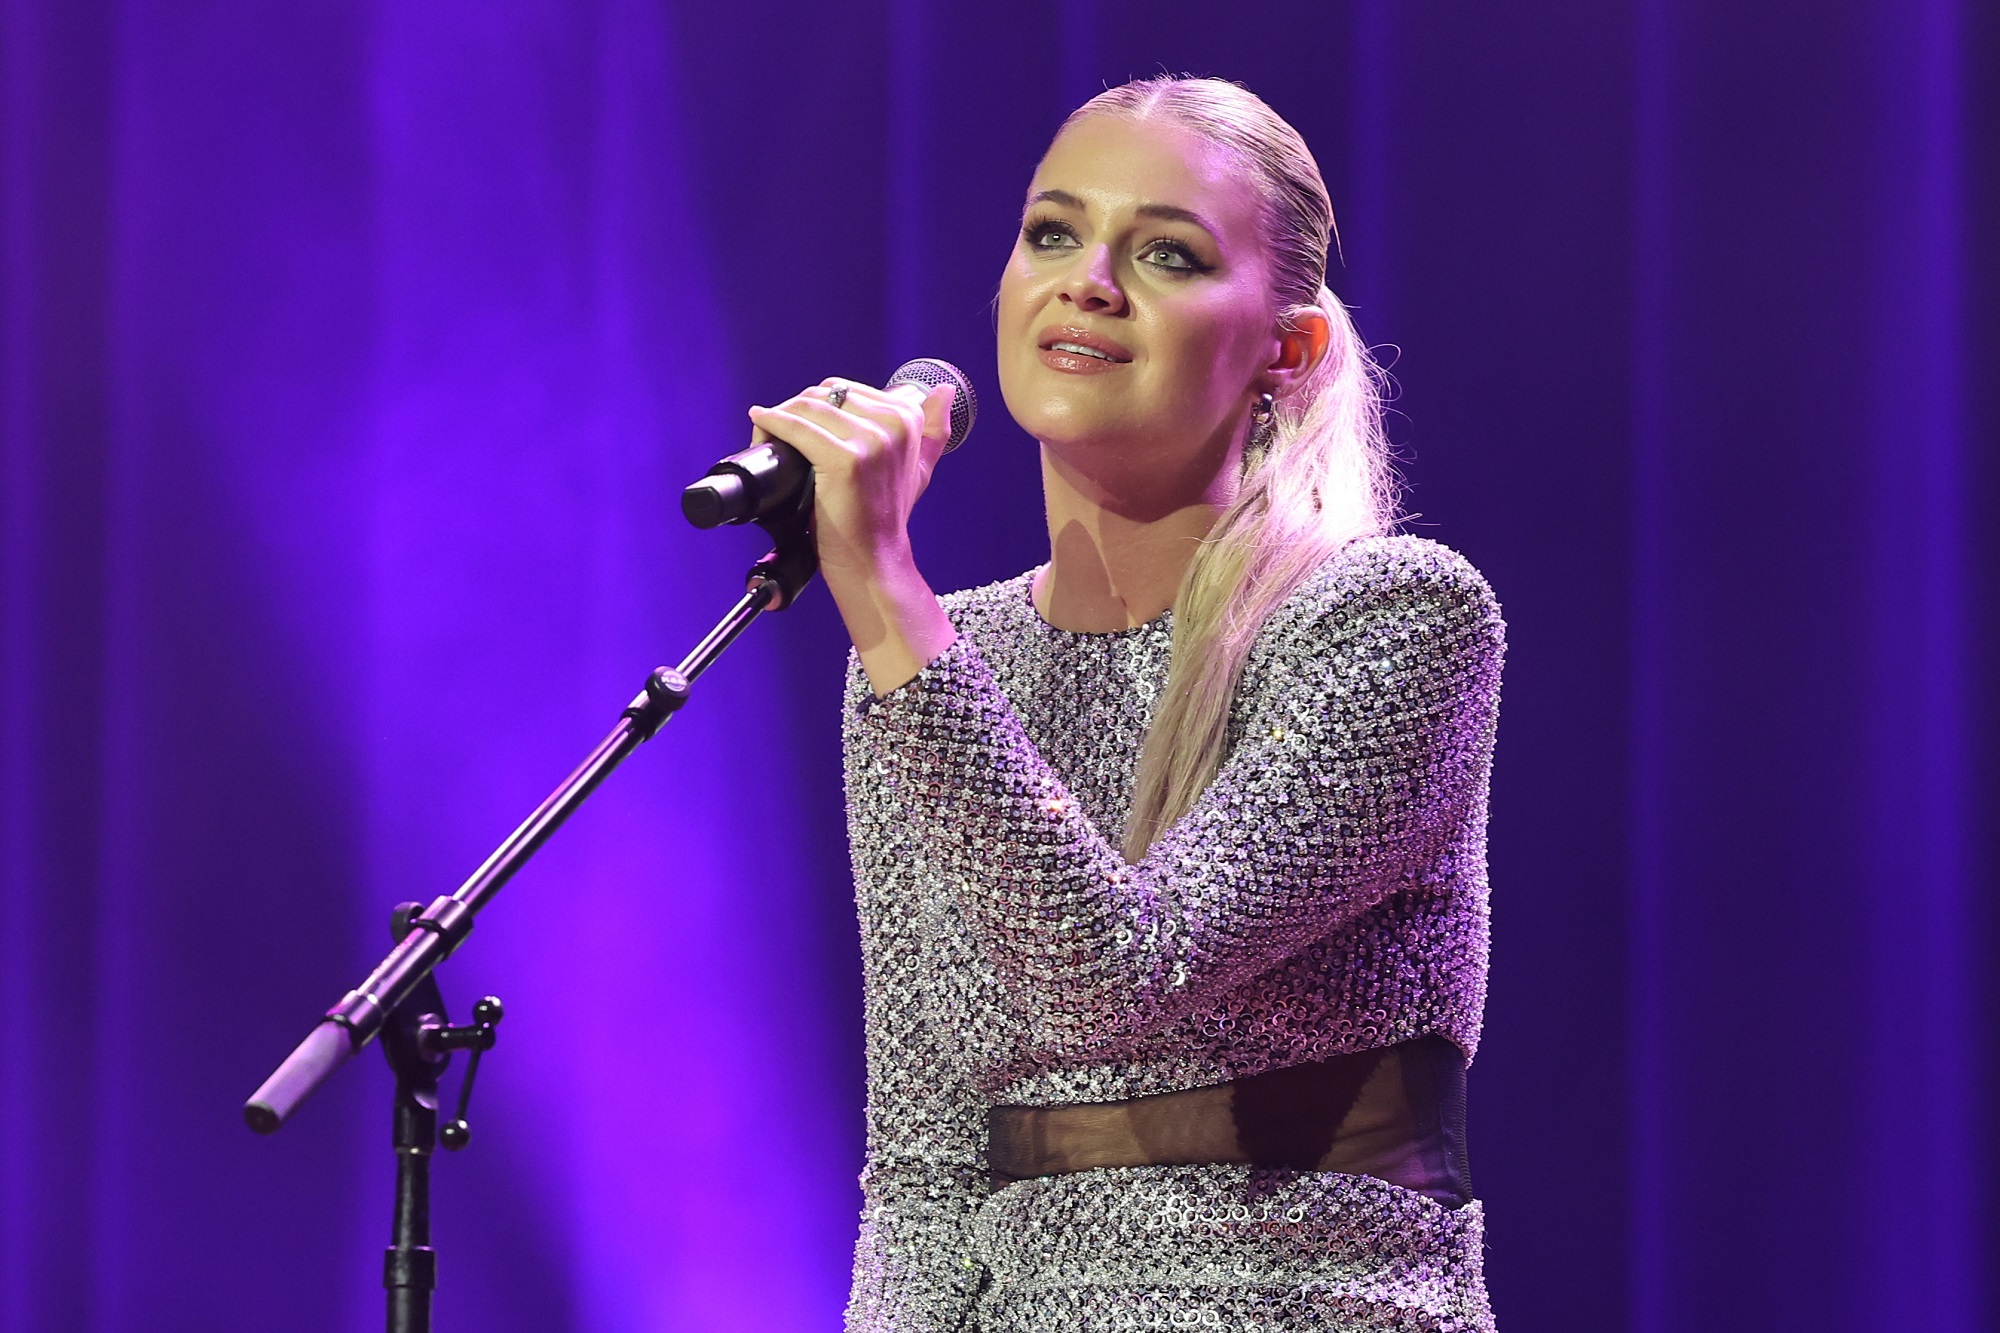 Kelsea Ballerini holds a microphone onstage while wearing a silver dress